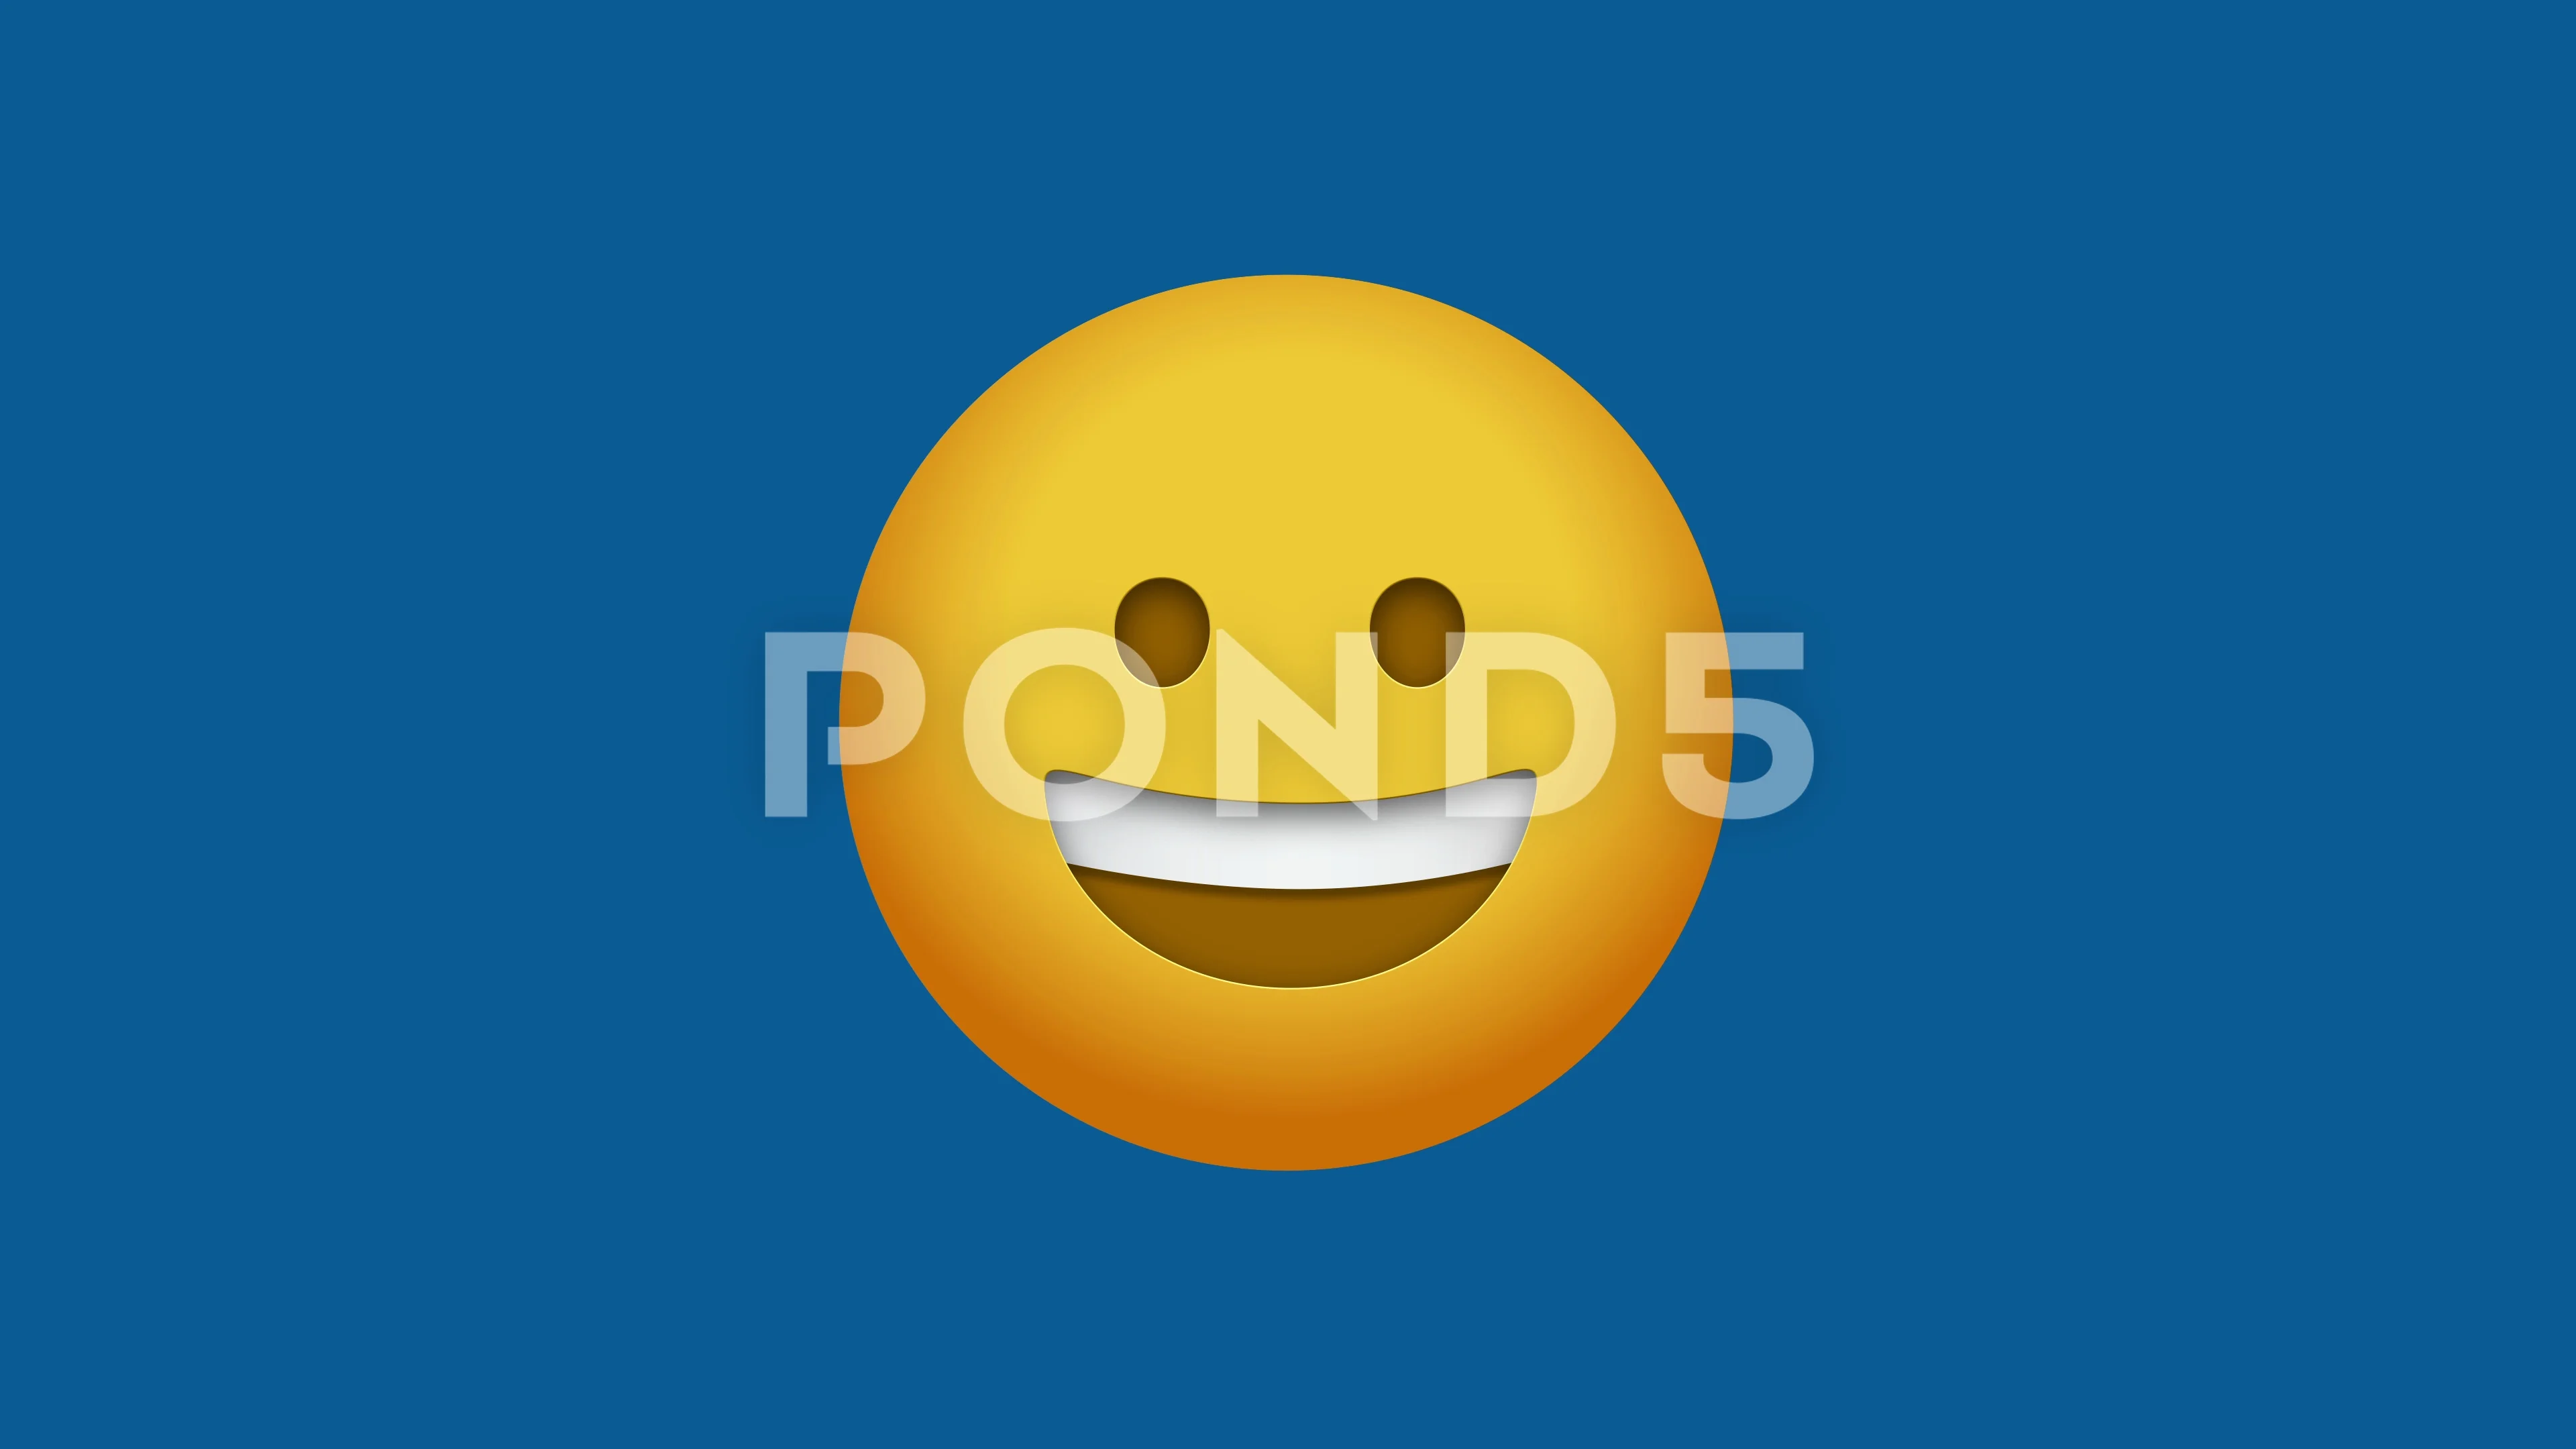 happy smiley face animation